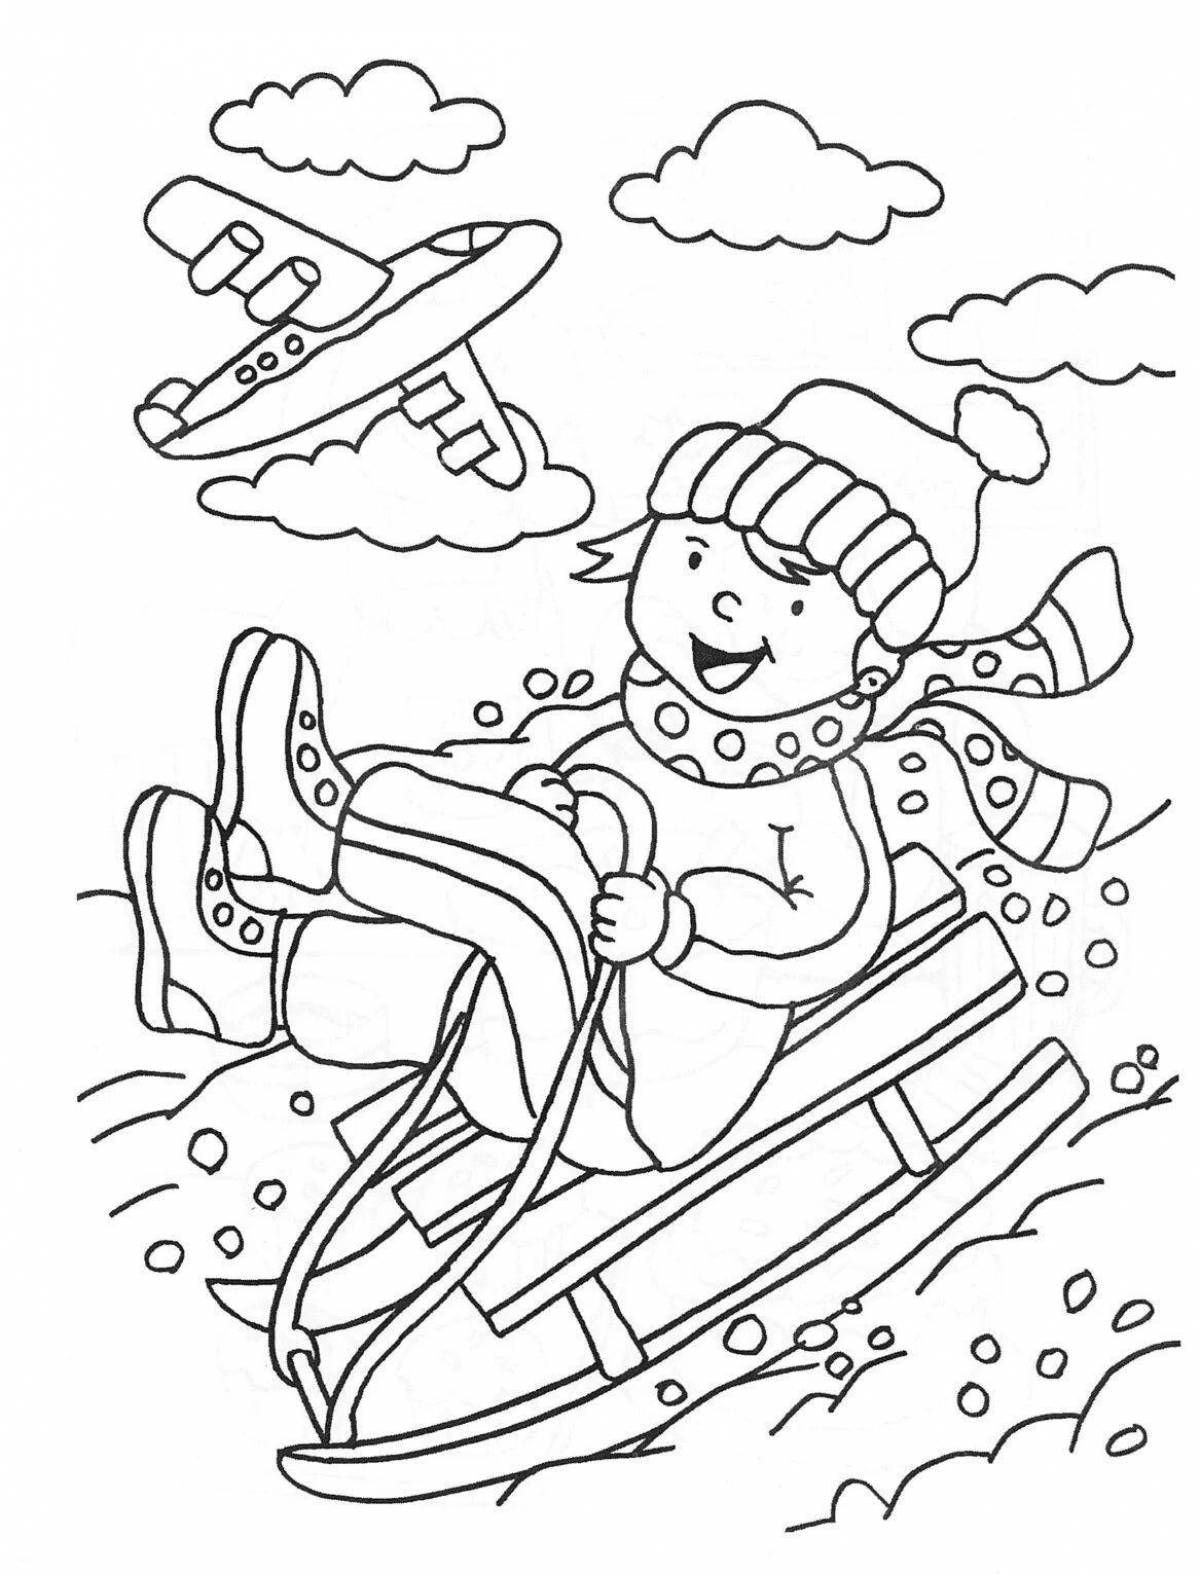 Amazing coloring pages kids on the hill in winter